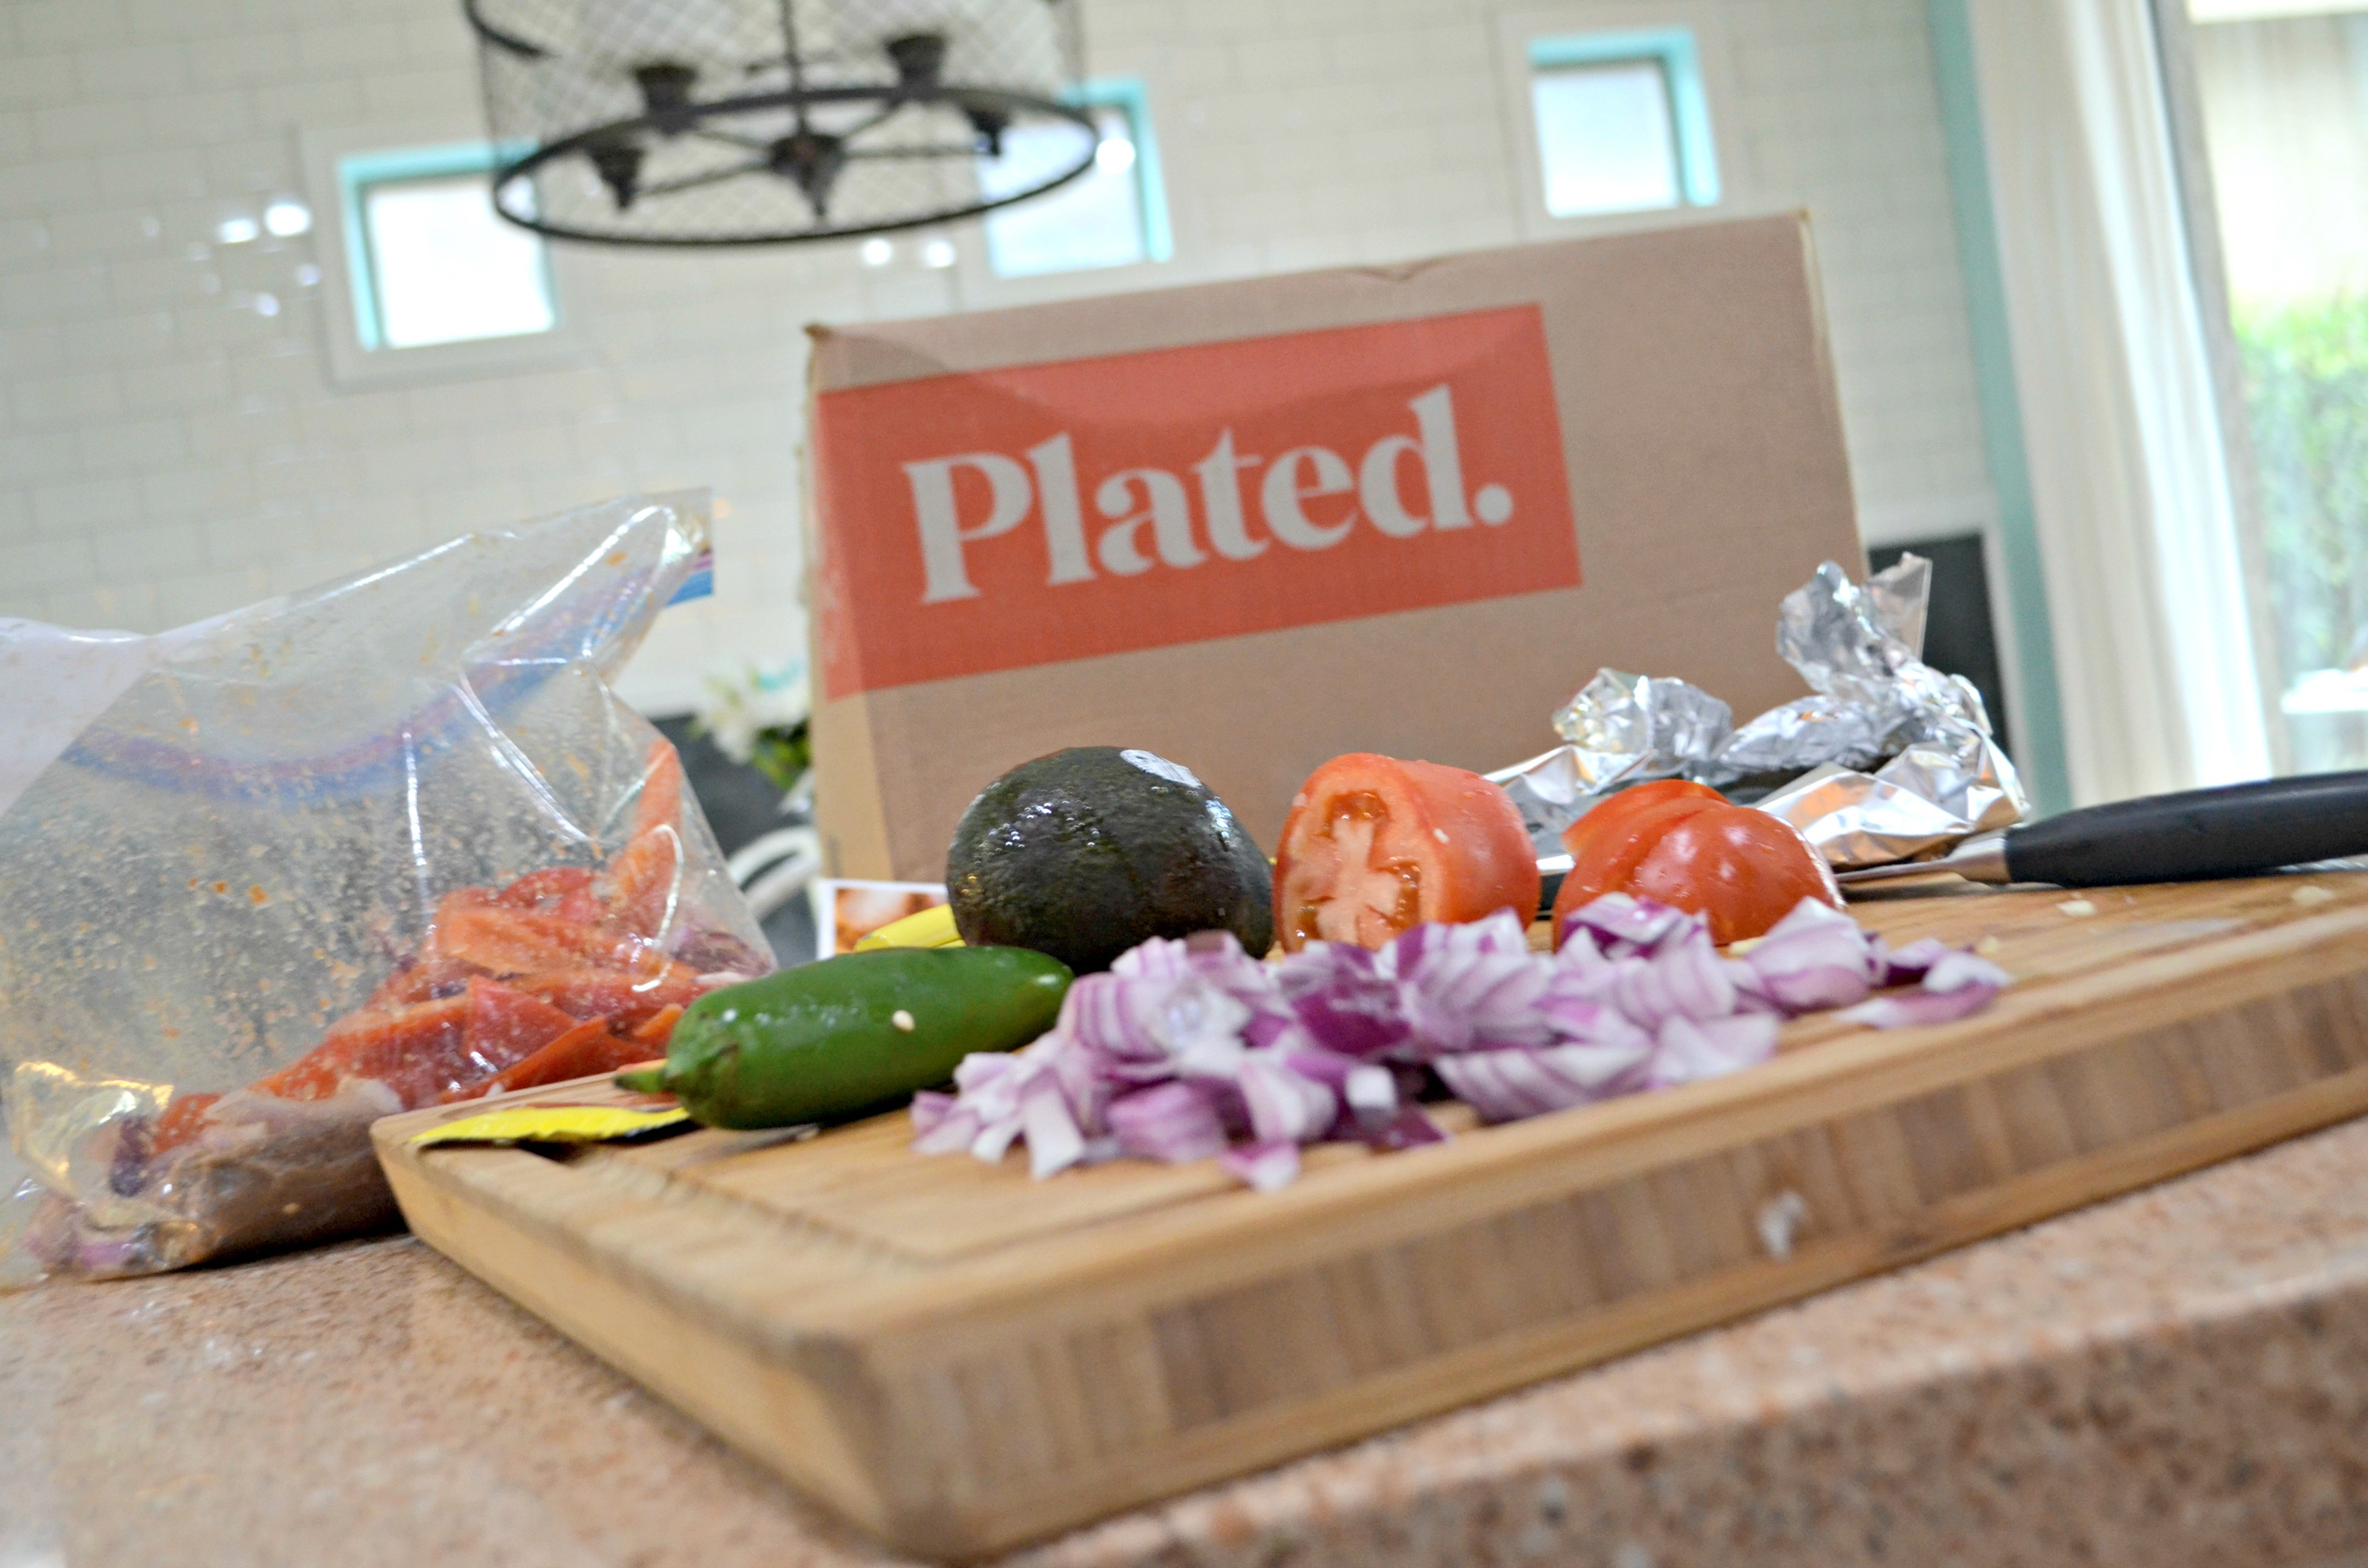 deal plated meal kit – Plated subscription box ingredients on a kitchen counter.